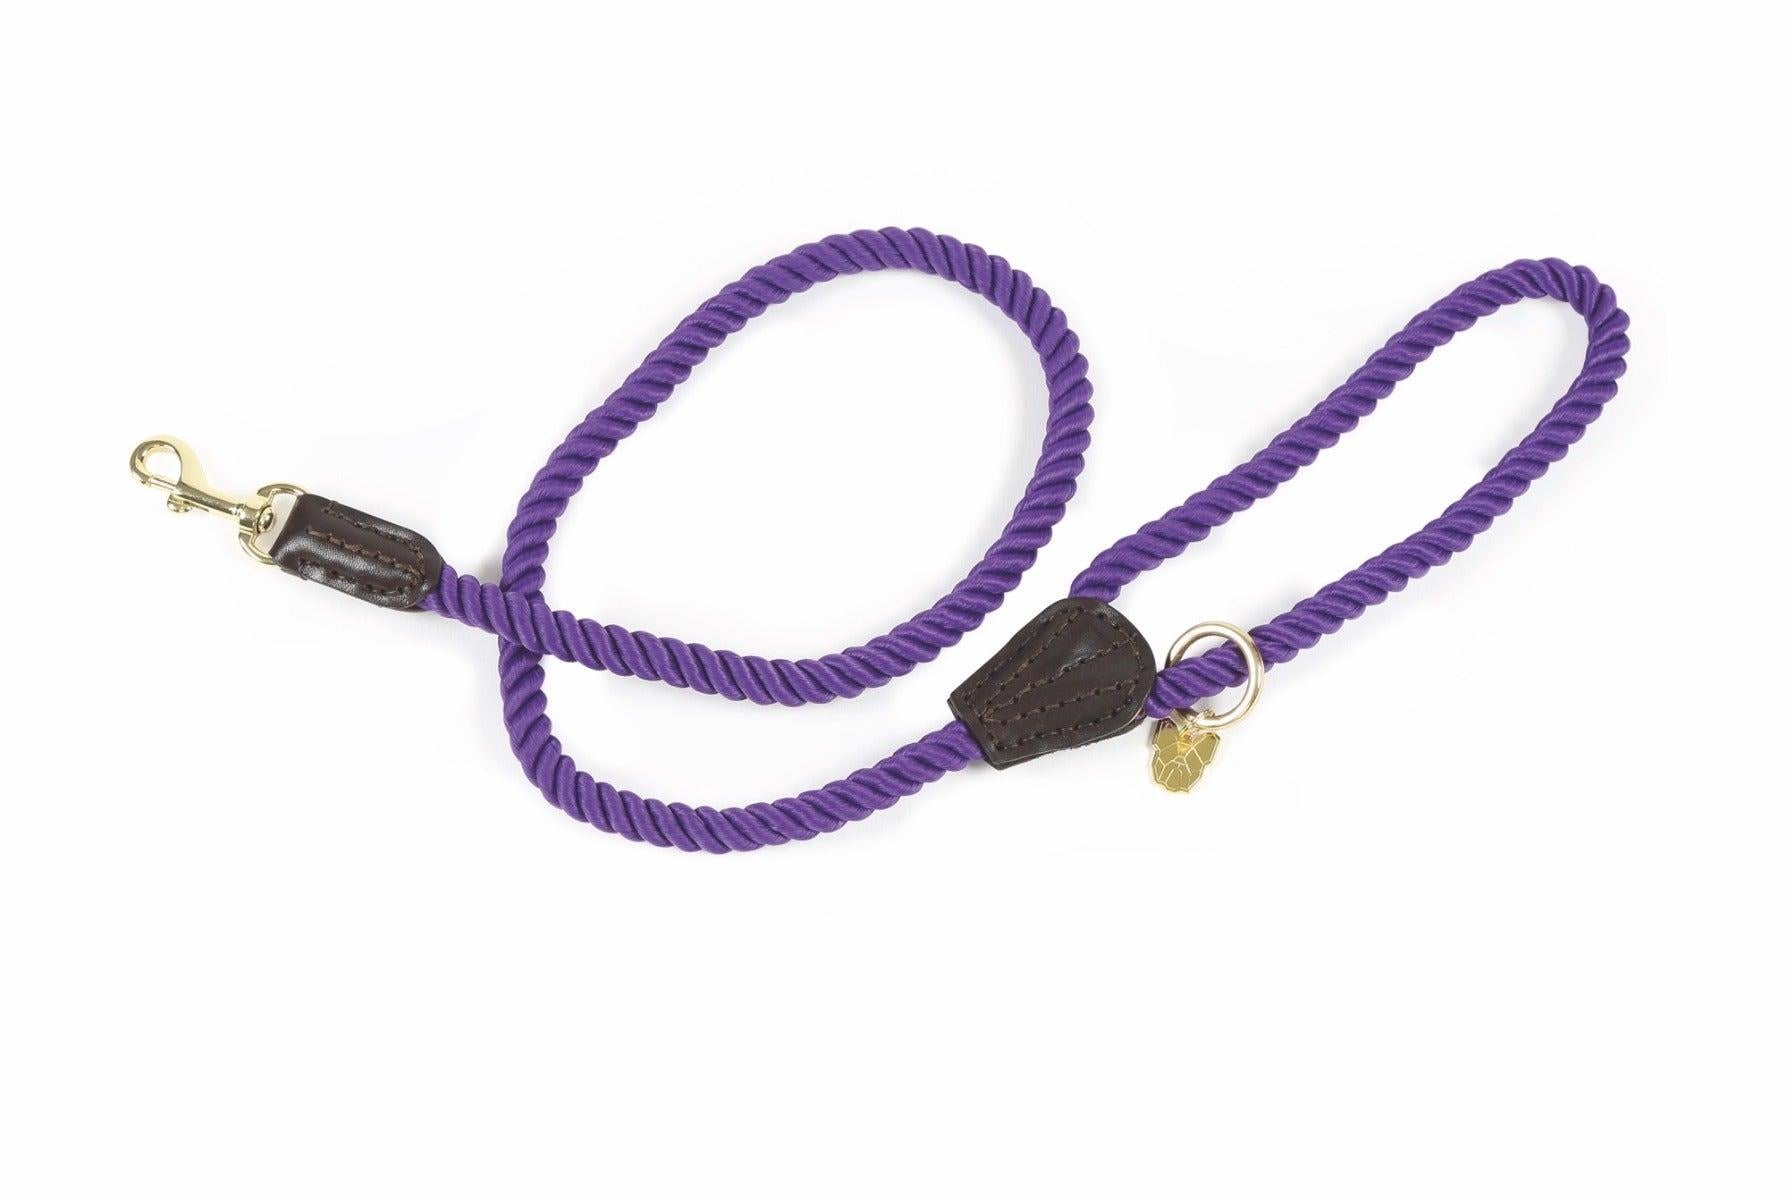 Digby & Fox Rope Dog Lead - Just Horse Riders